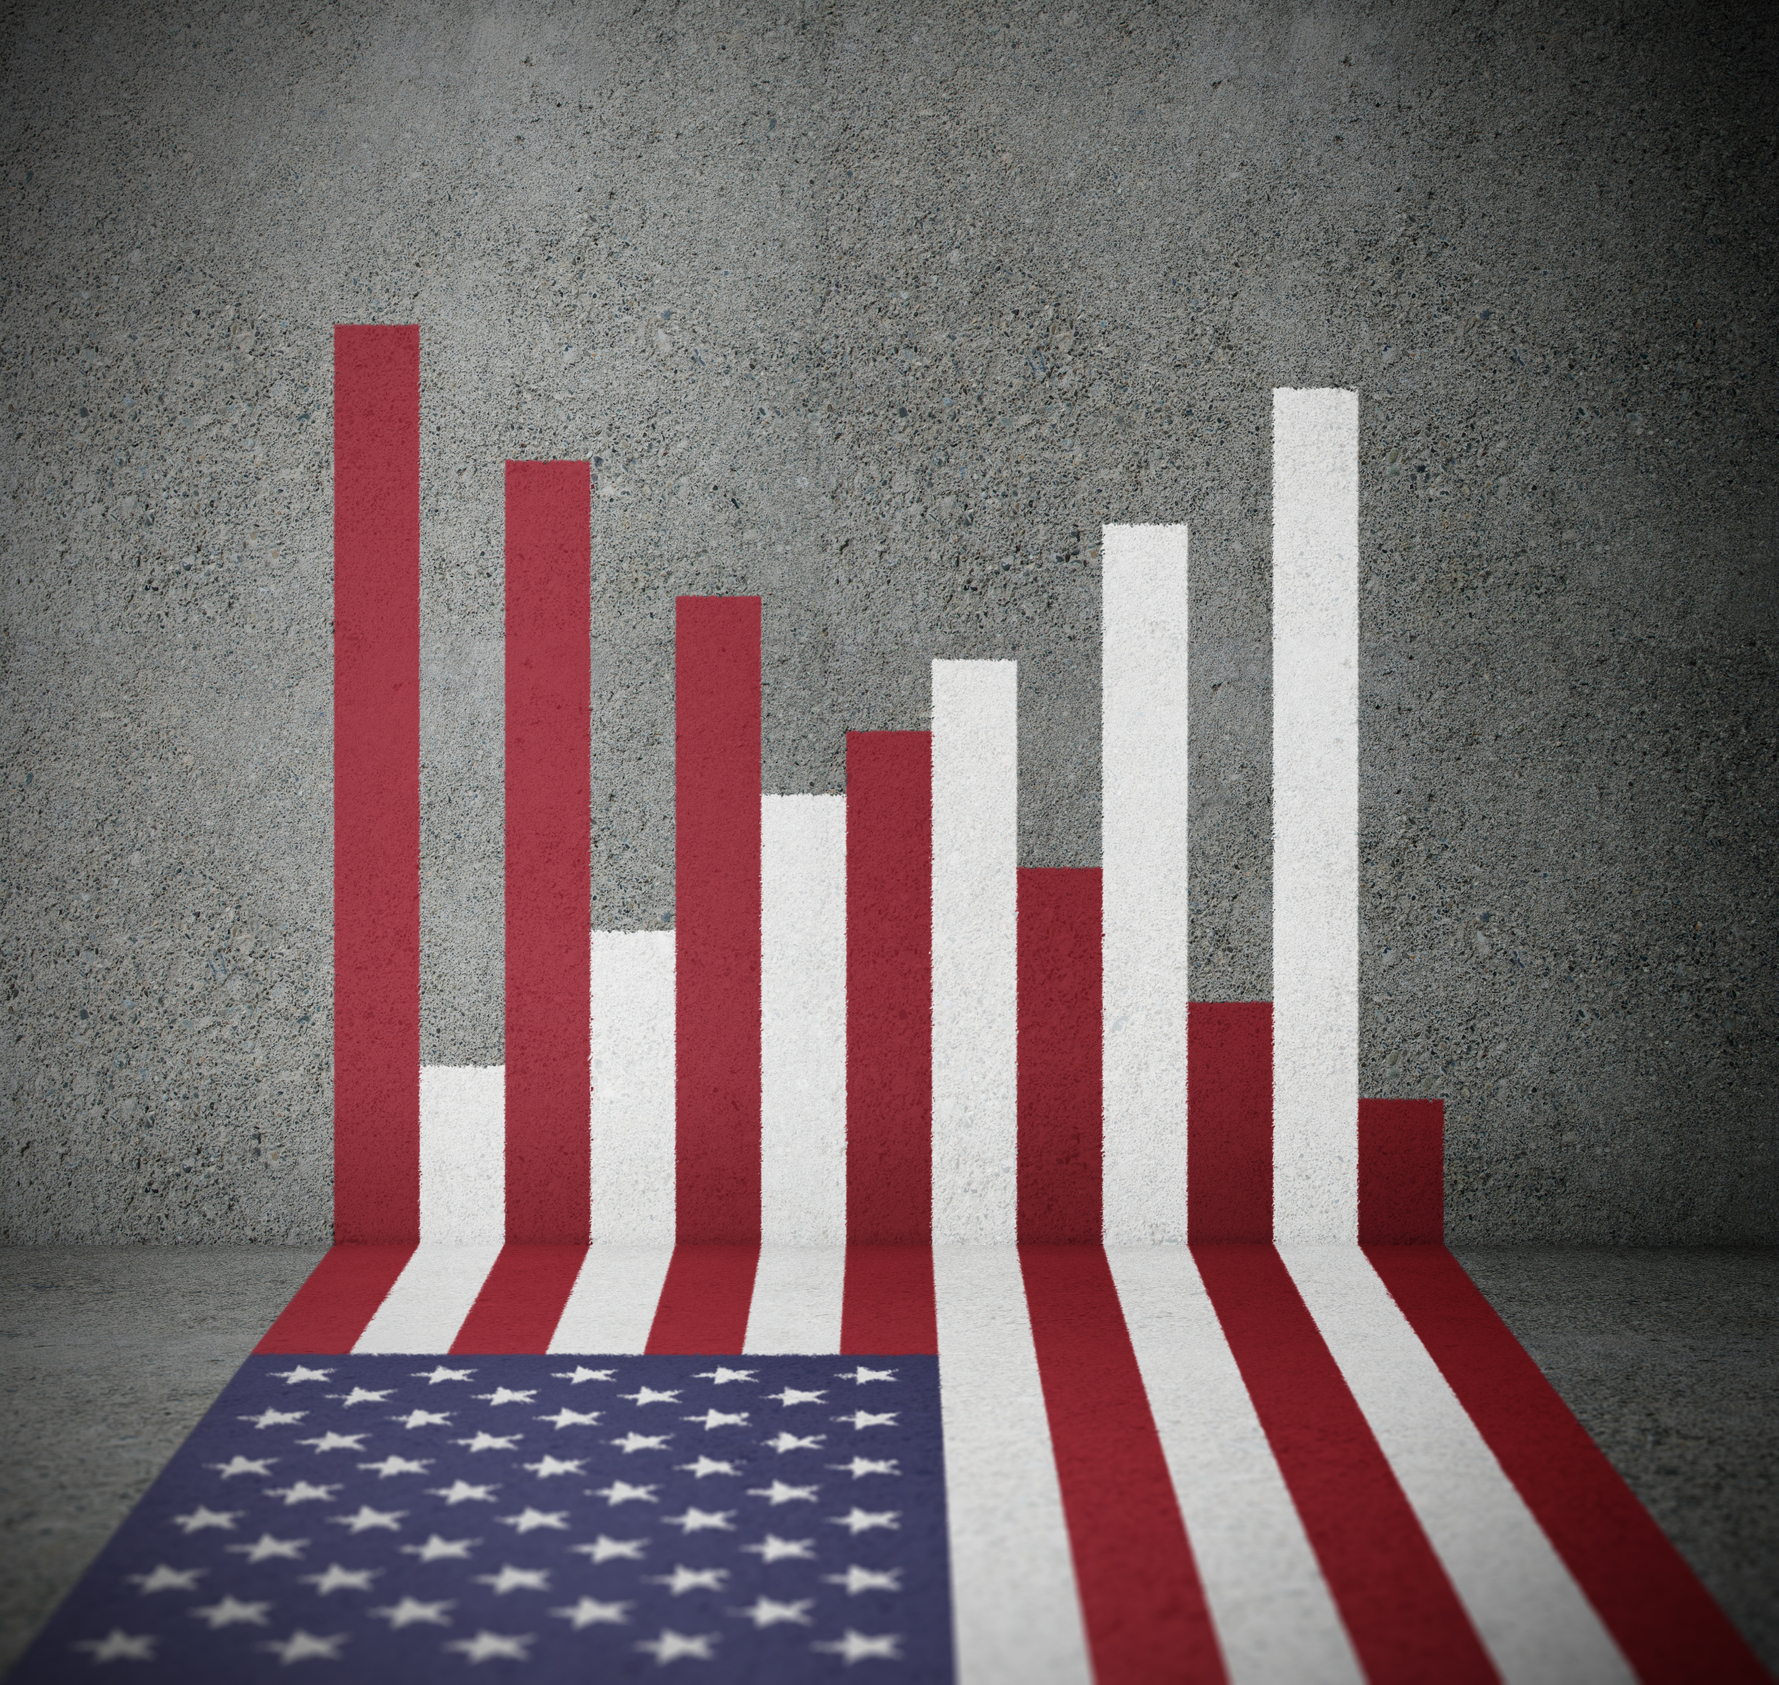 American flag bars forming financial graph pointing up and down